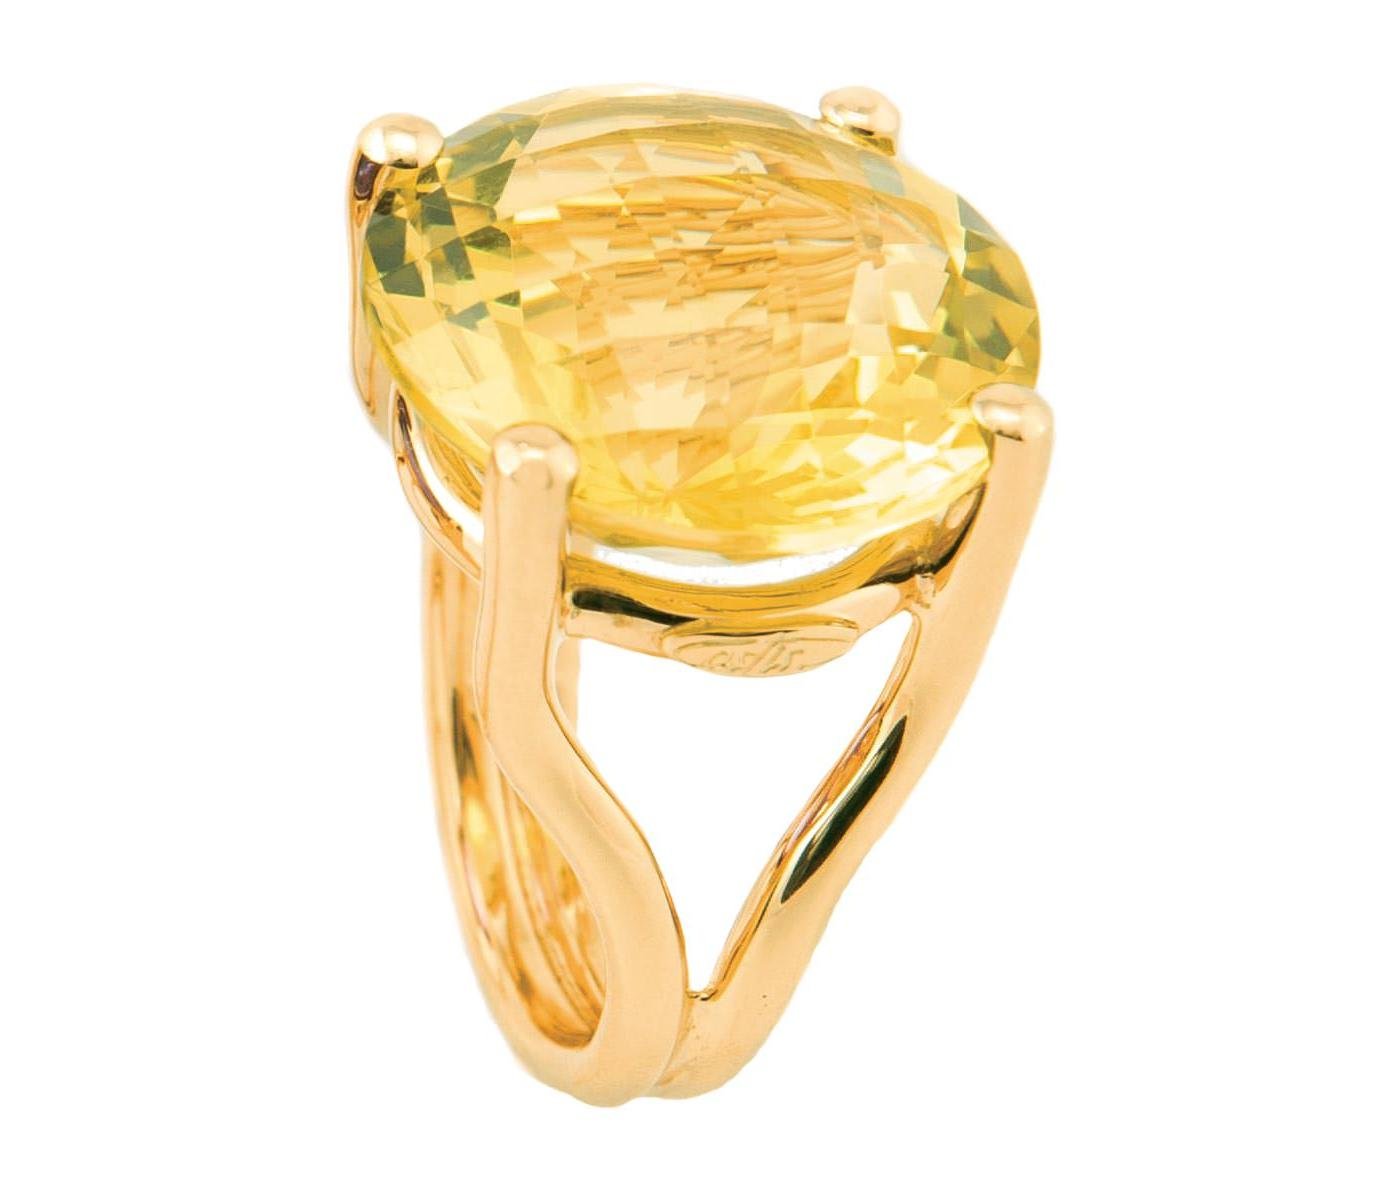 Ring by Costis